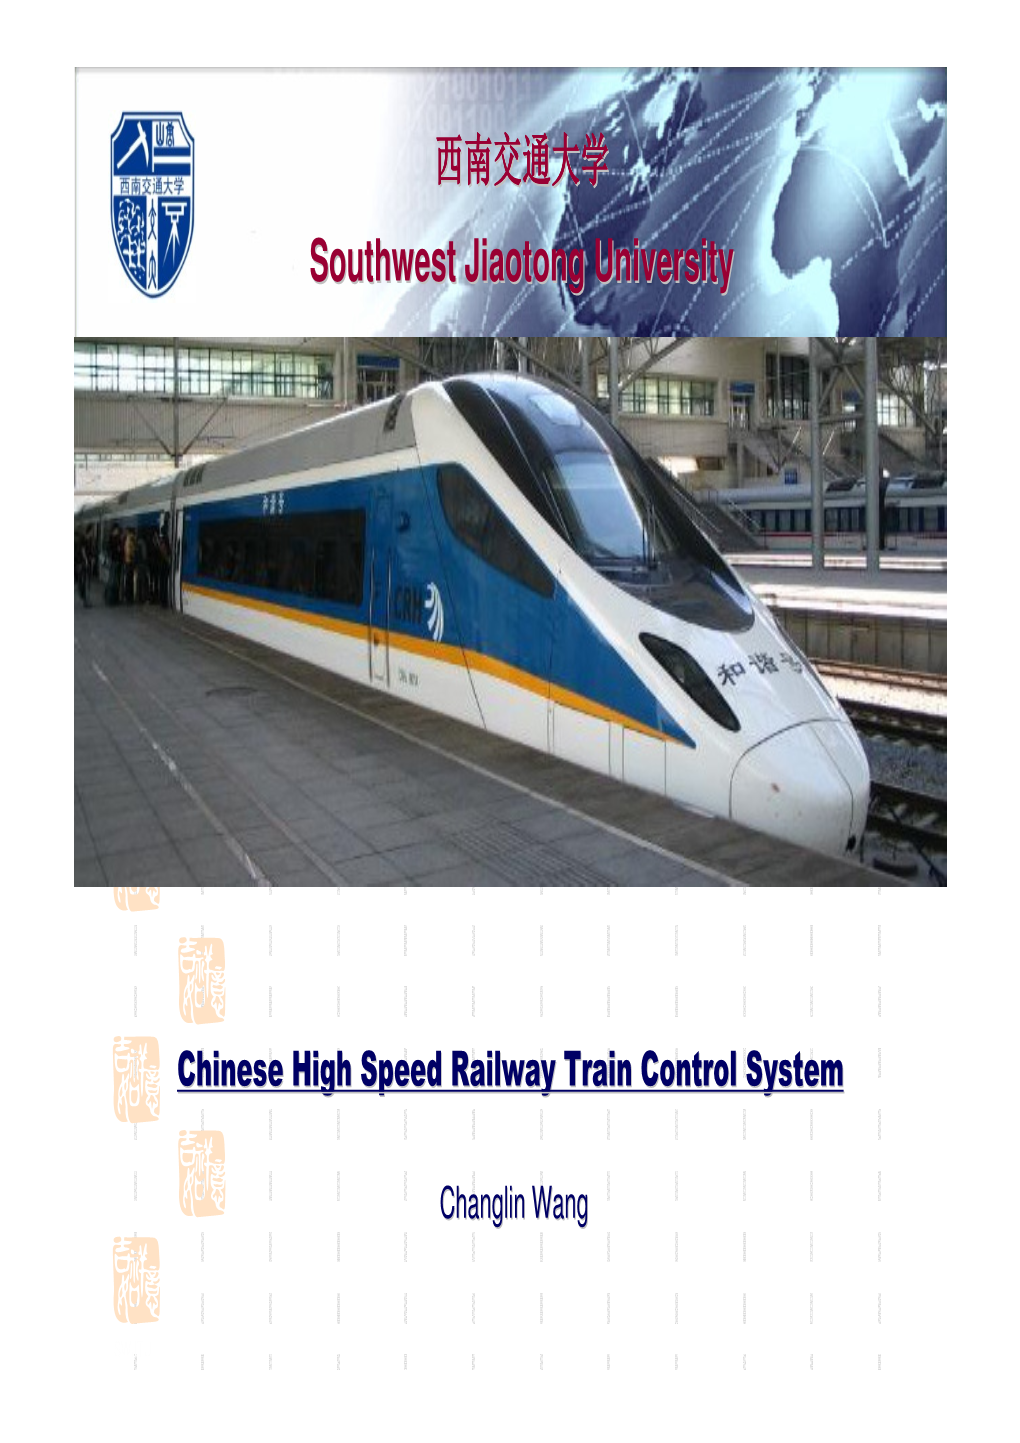 Chinese Railway Train Control System (CTCS)